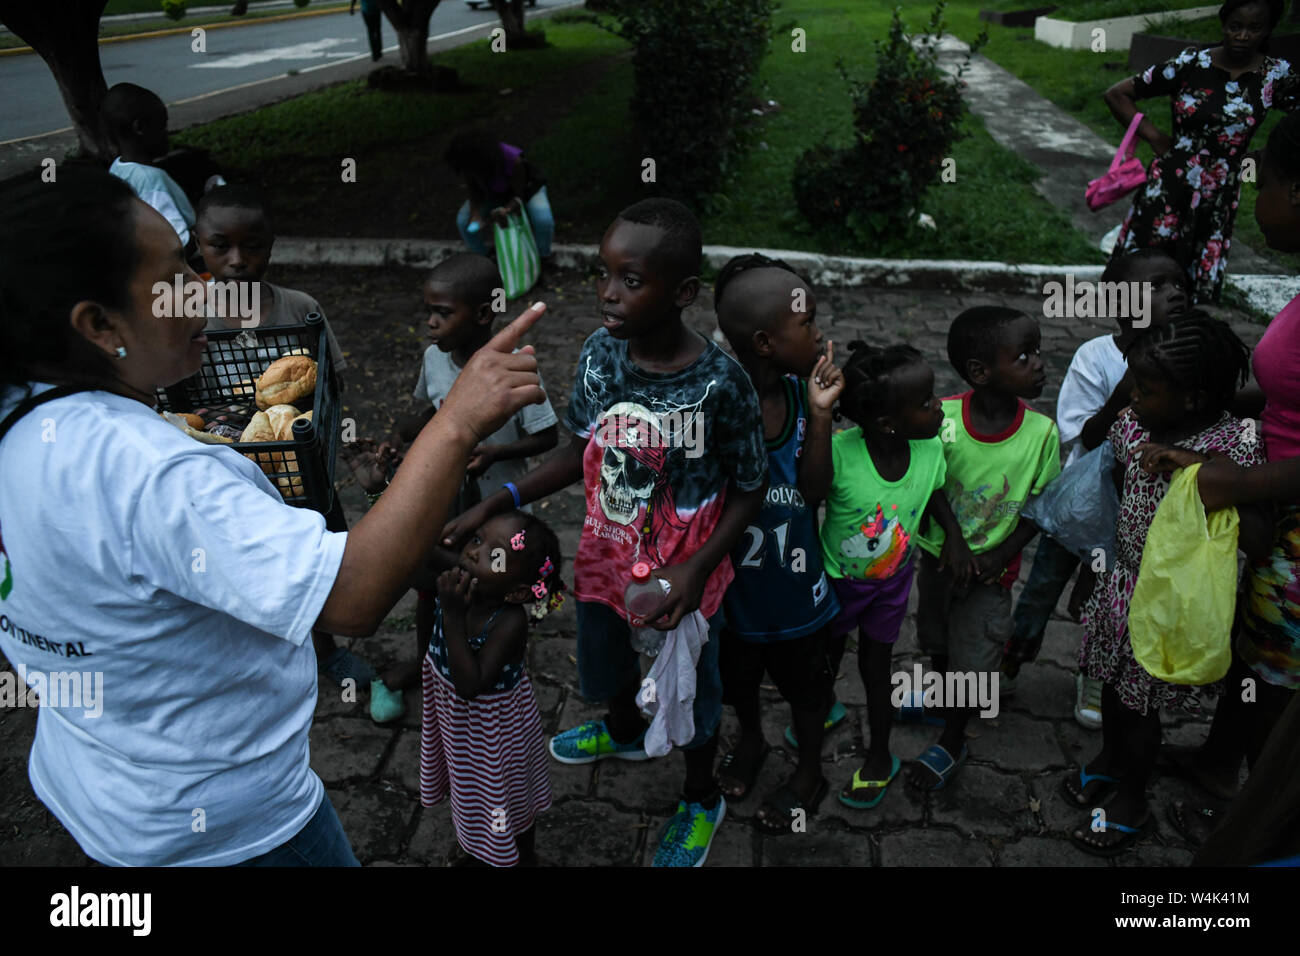 Tapachula, Chiapas, Mexico. 23rd July, 2019. Children from Haitian and African families push to each other on Tuesday, trying to reach a piece of bread and pampers given by catholic nuns of Mision Cristo Resusitado from Guadalajara Mexico, just steps away from Siglo XXI immigration center where most wait three to four months for a permit to travel north to the US-Mexico border. Credit: Miguel Juarez Lugo/ZUMA Wire/Alamy Live News Stock Photo